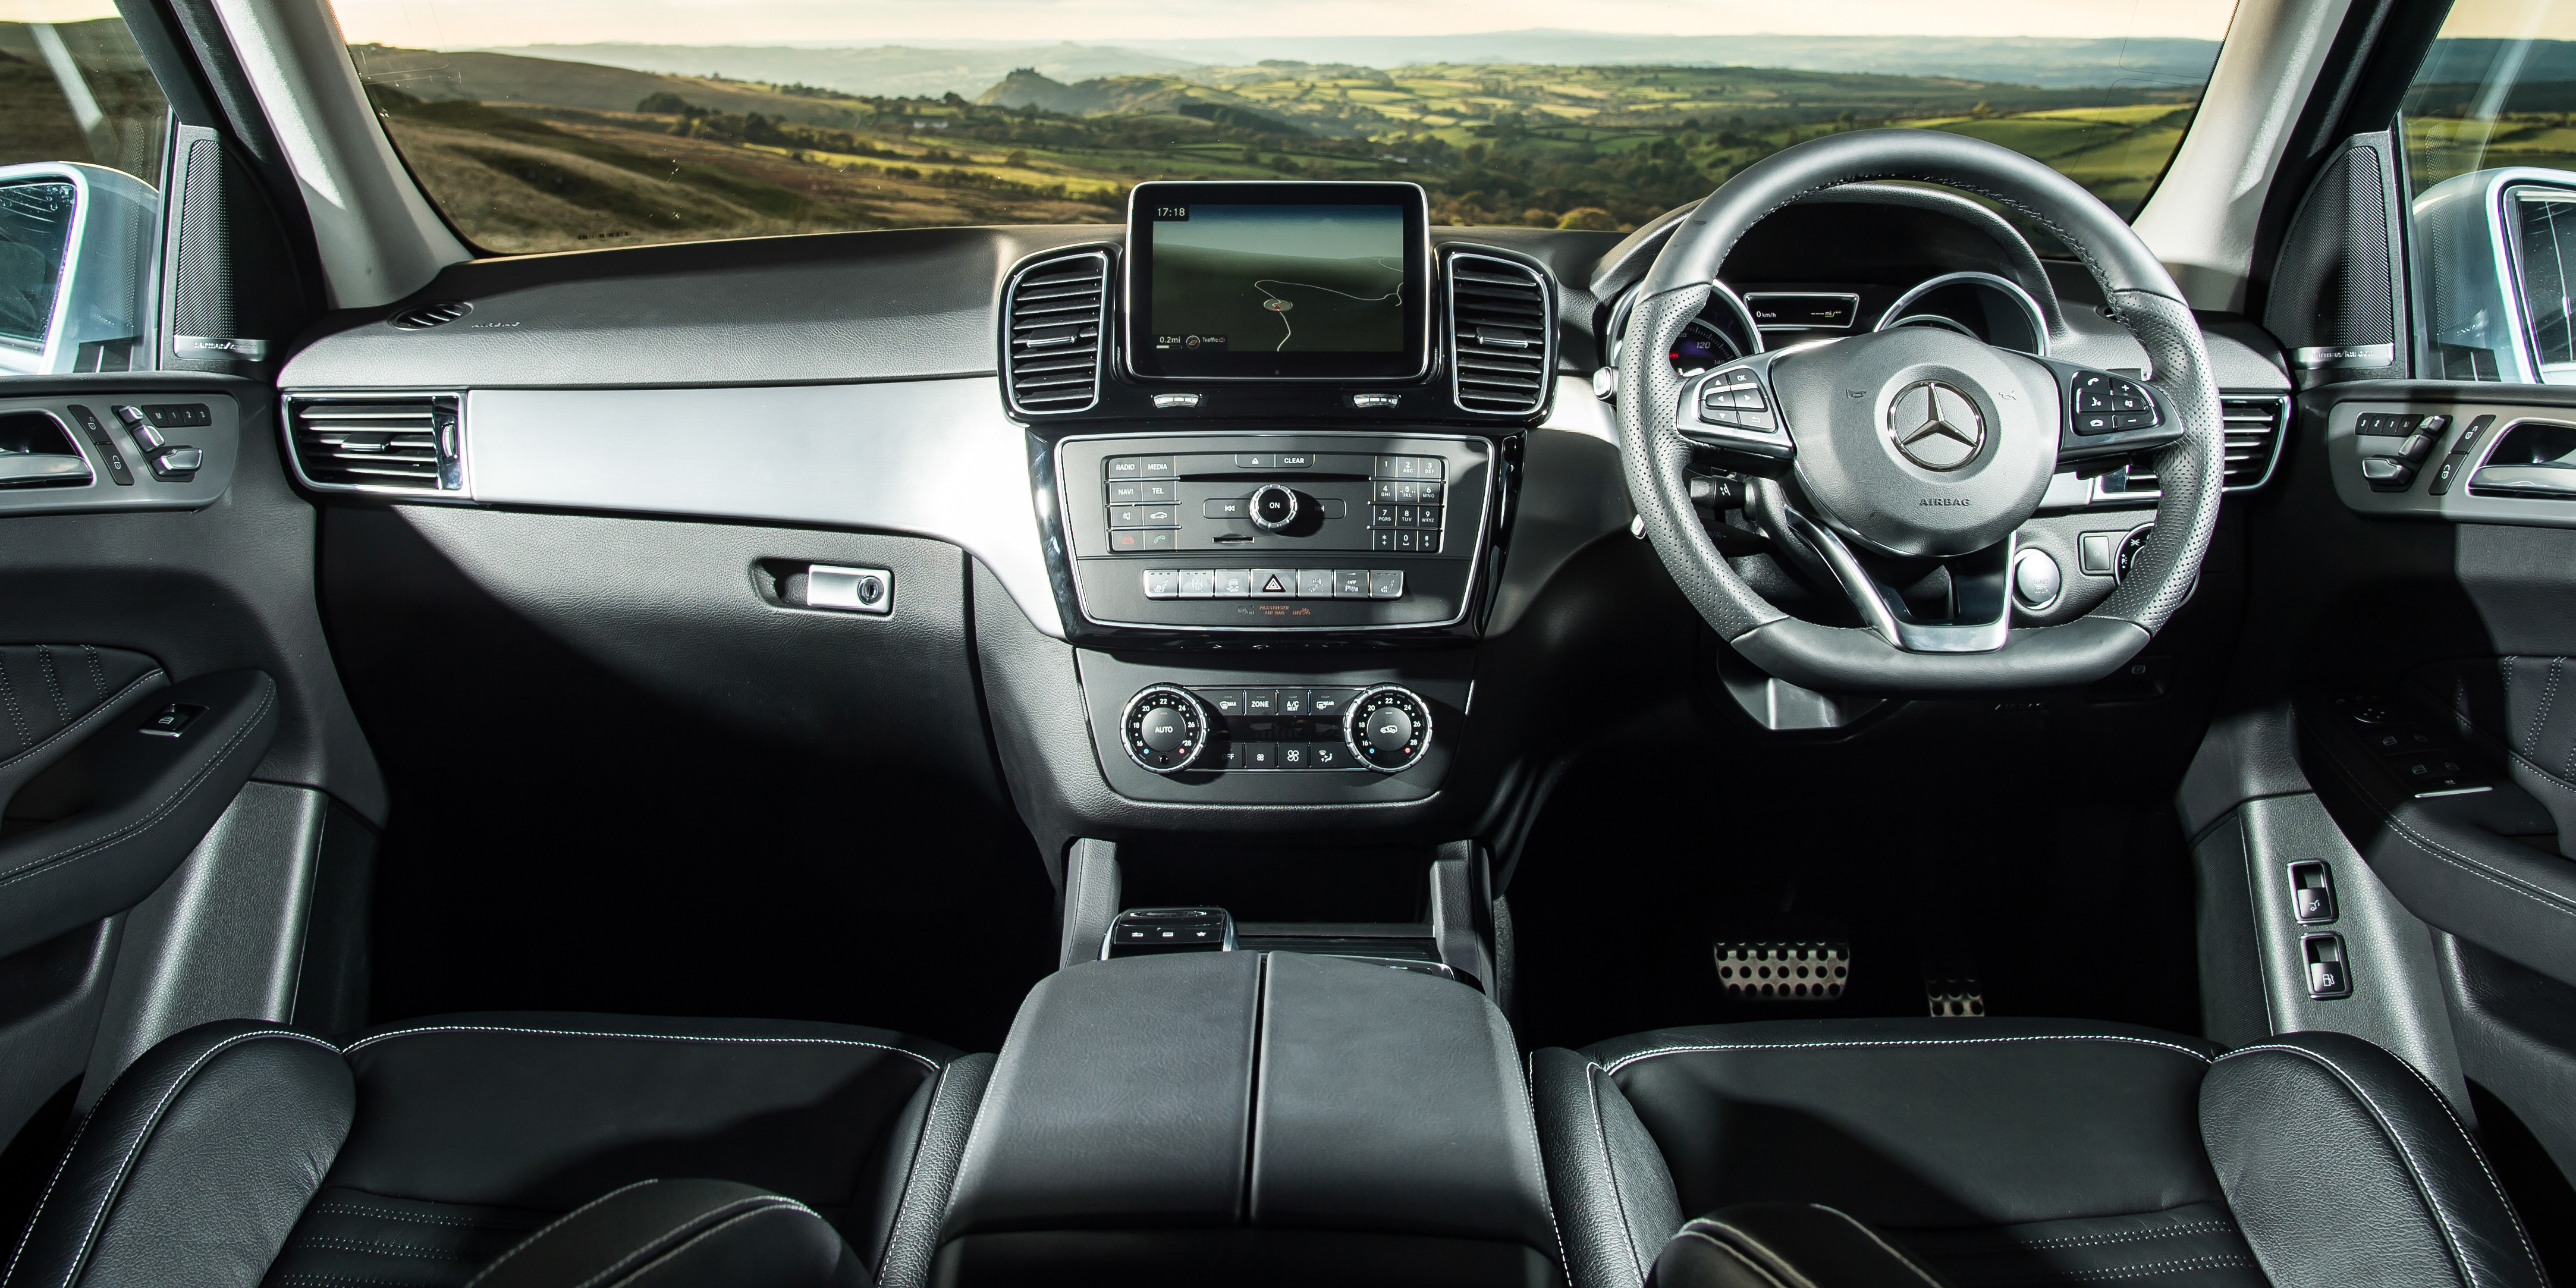 The Mercedes' tall body gives you a great view out